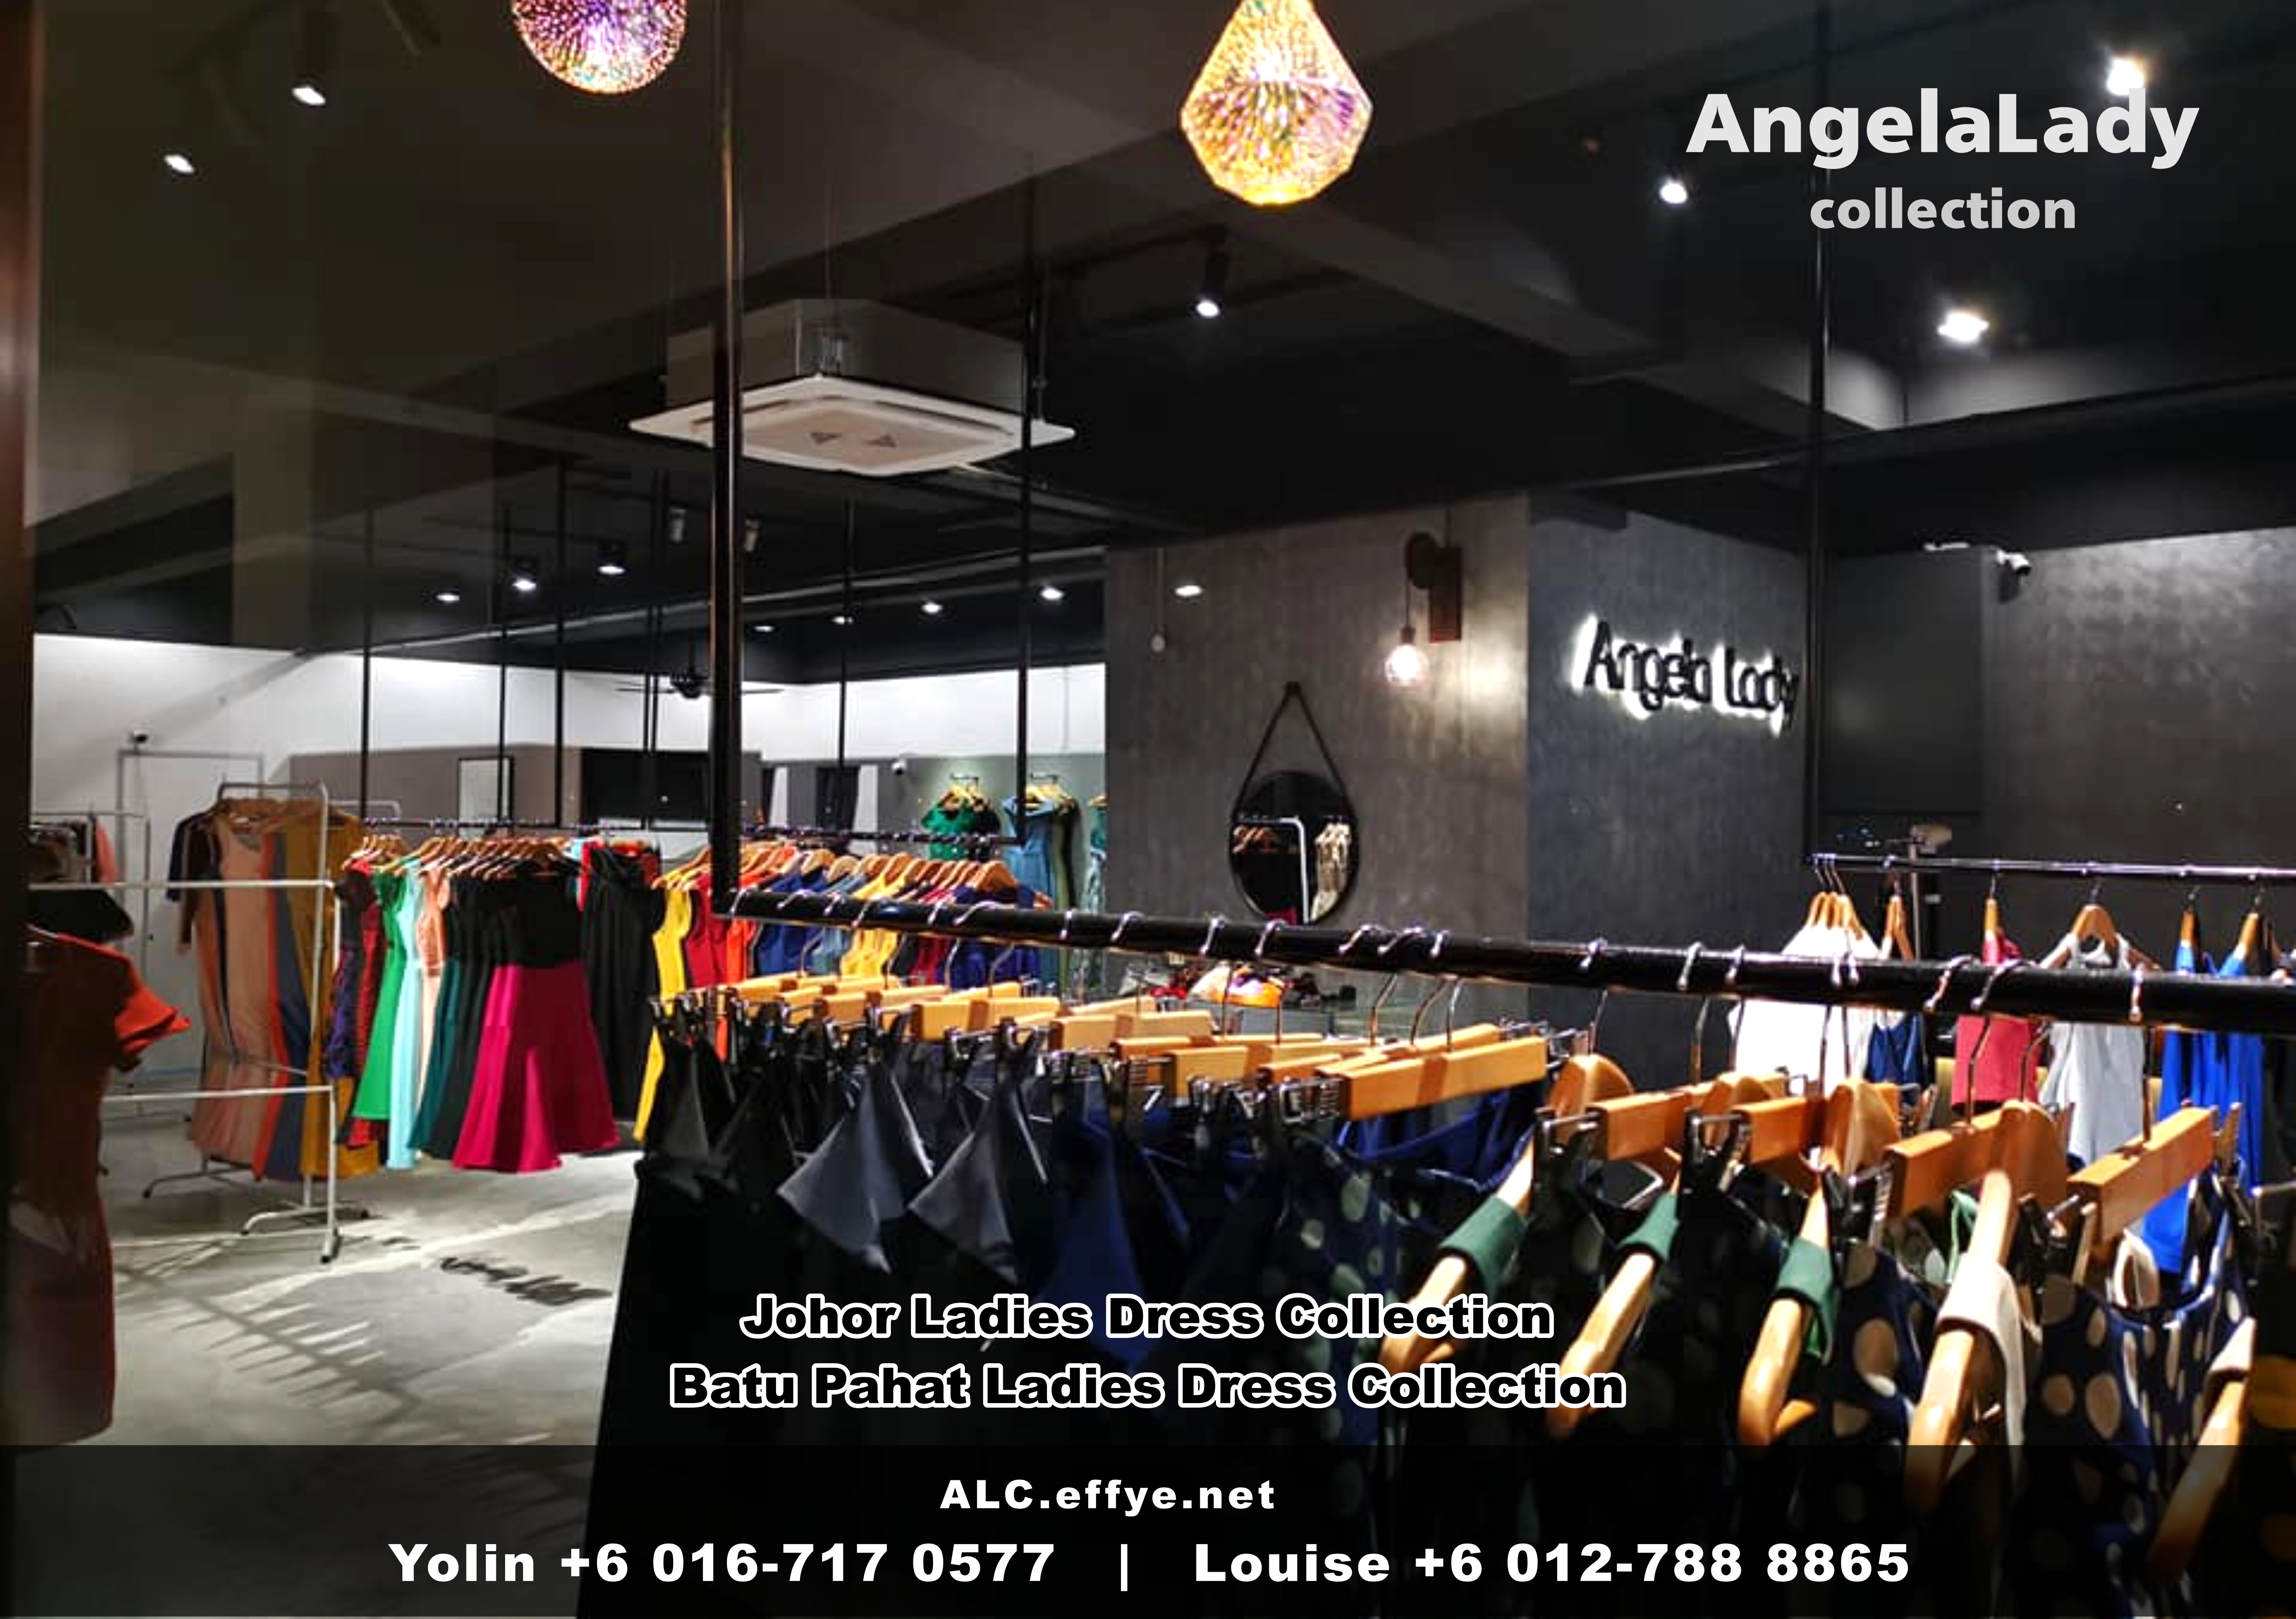 Johor Batu Pahat Ladies Dress Boutique Angela Lady Collection Dinner Dress Evening Gown Maxi Dress Evening Dress Gown Boutique Fashion Lady Apparel Clothes Jeans Skirt Pants Malaysia A01-017